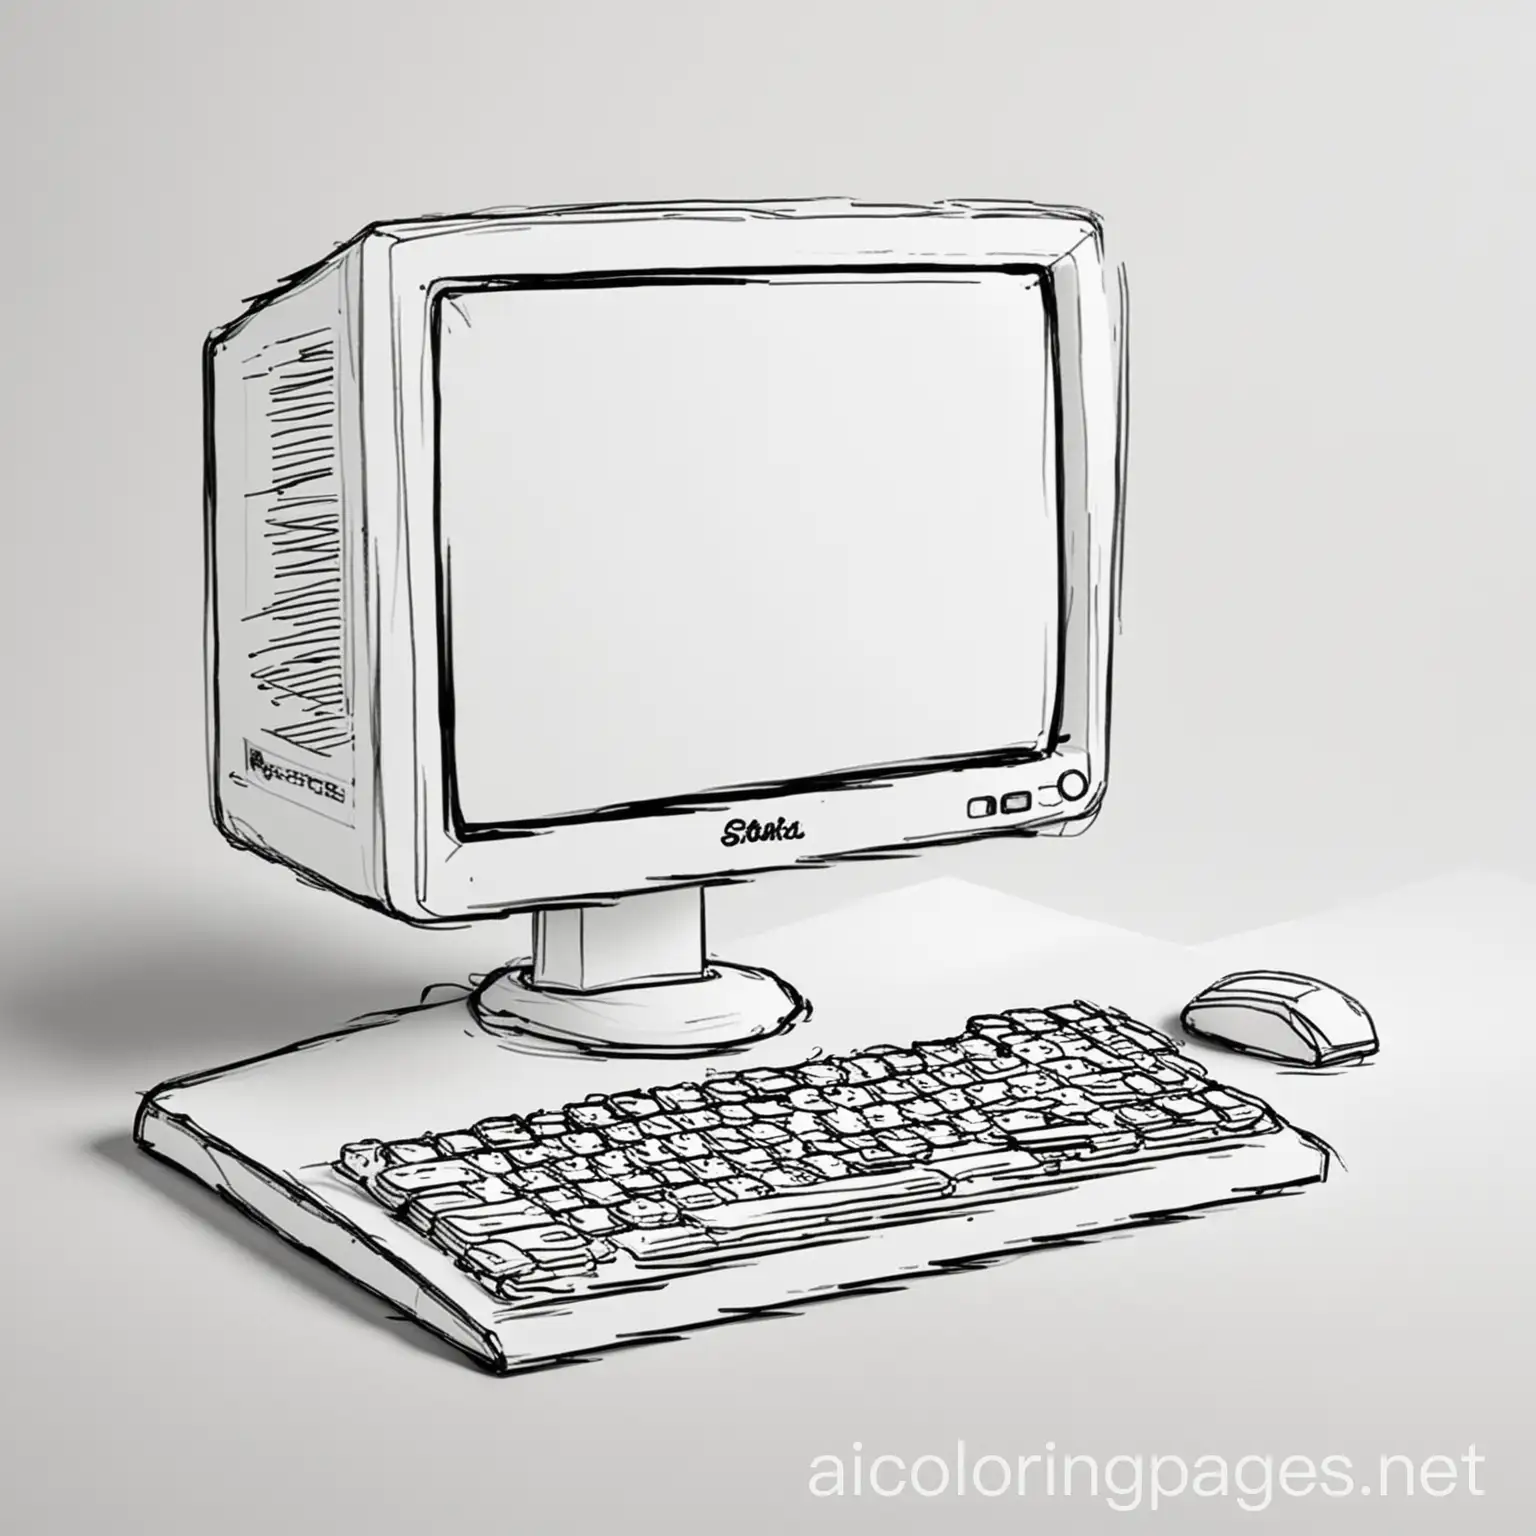 CREATE A PHOTO OF A COLORFUL AND REALISTIC COMPUTER, Coloring Page, black and white, line art, white background, Simplicity, Ample White Space. The background of the coloring page is plain white to make it easy for young children to color within the lines. The outlines of all the subjects are easy to distinguish, making it simple for kids to color without too much difficulty